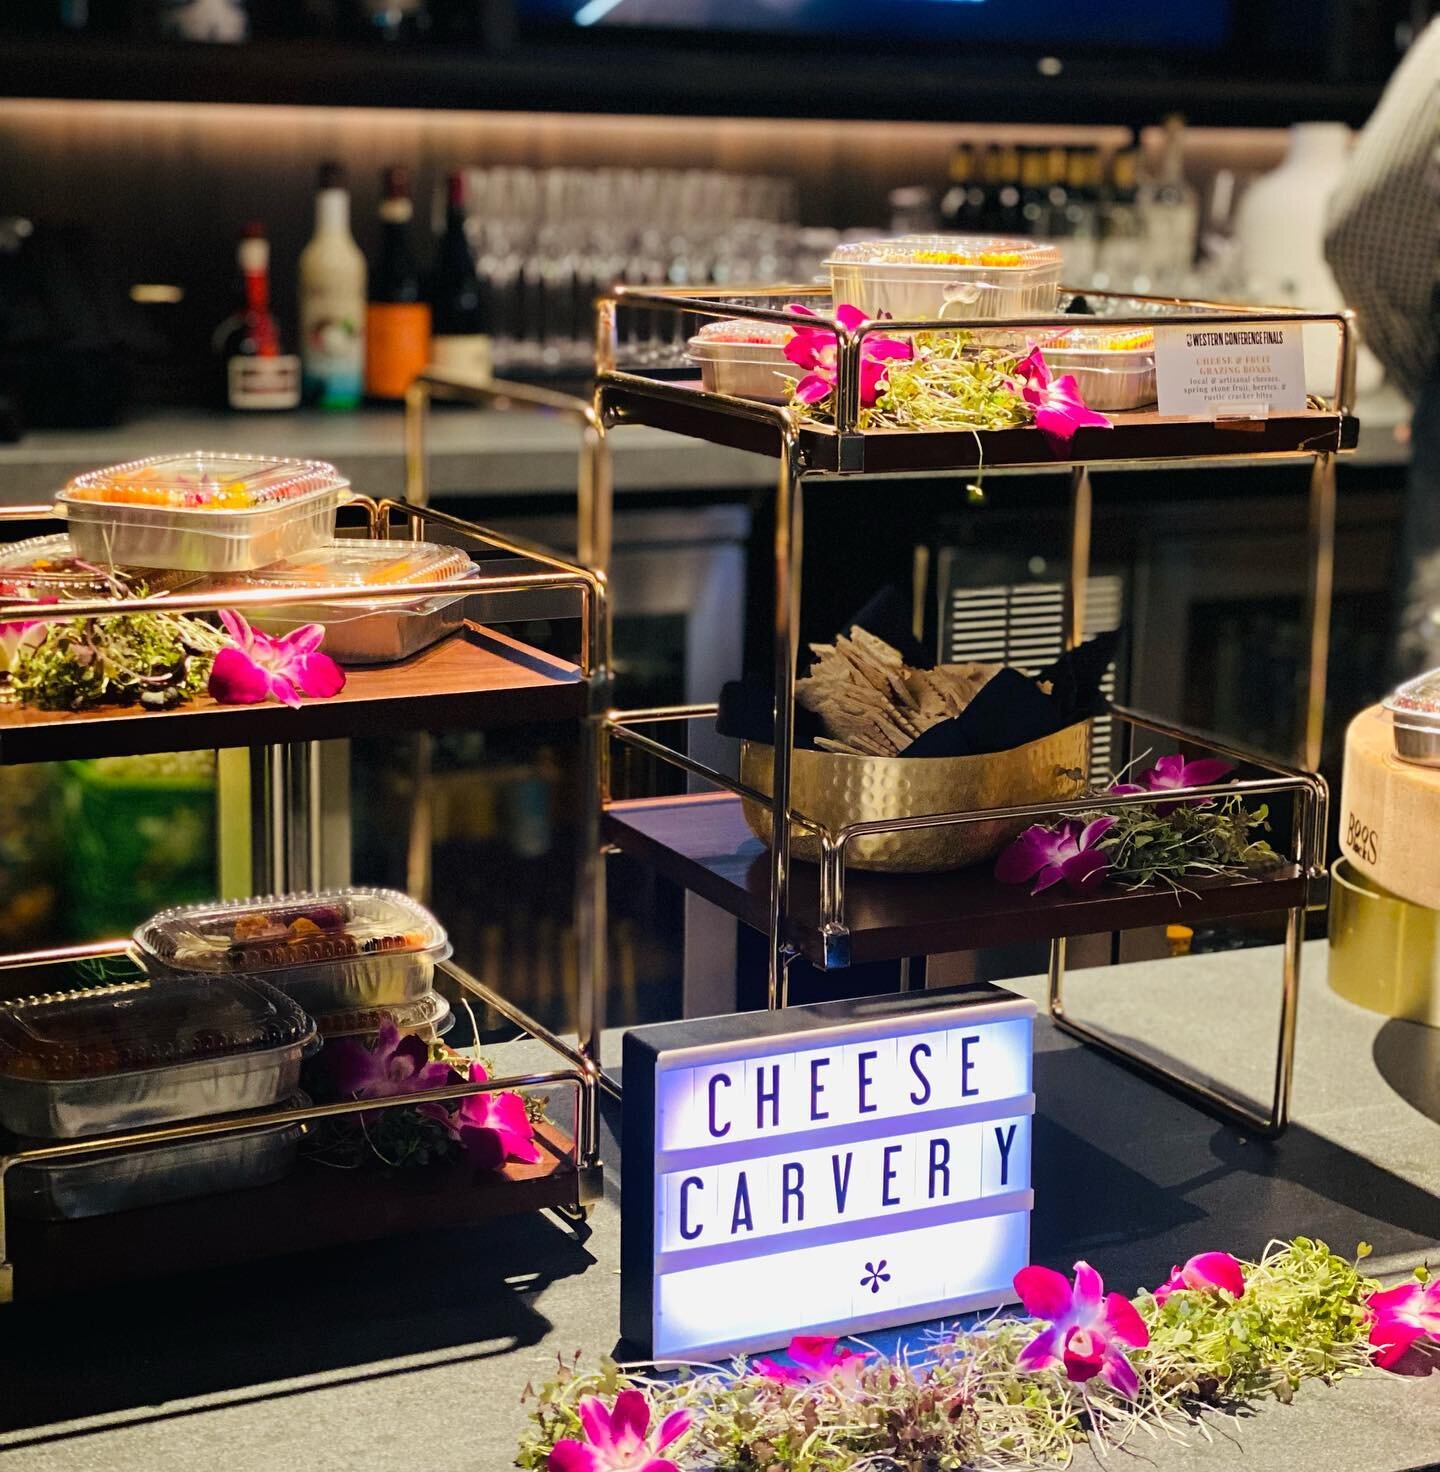 Not your ordinary cheese station 🧀✨👉 

#goldblooded #cheese #sculpture #nbafinals #chasecenter #tasteofchasecenter